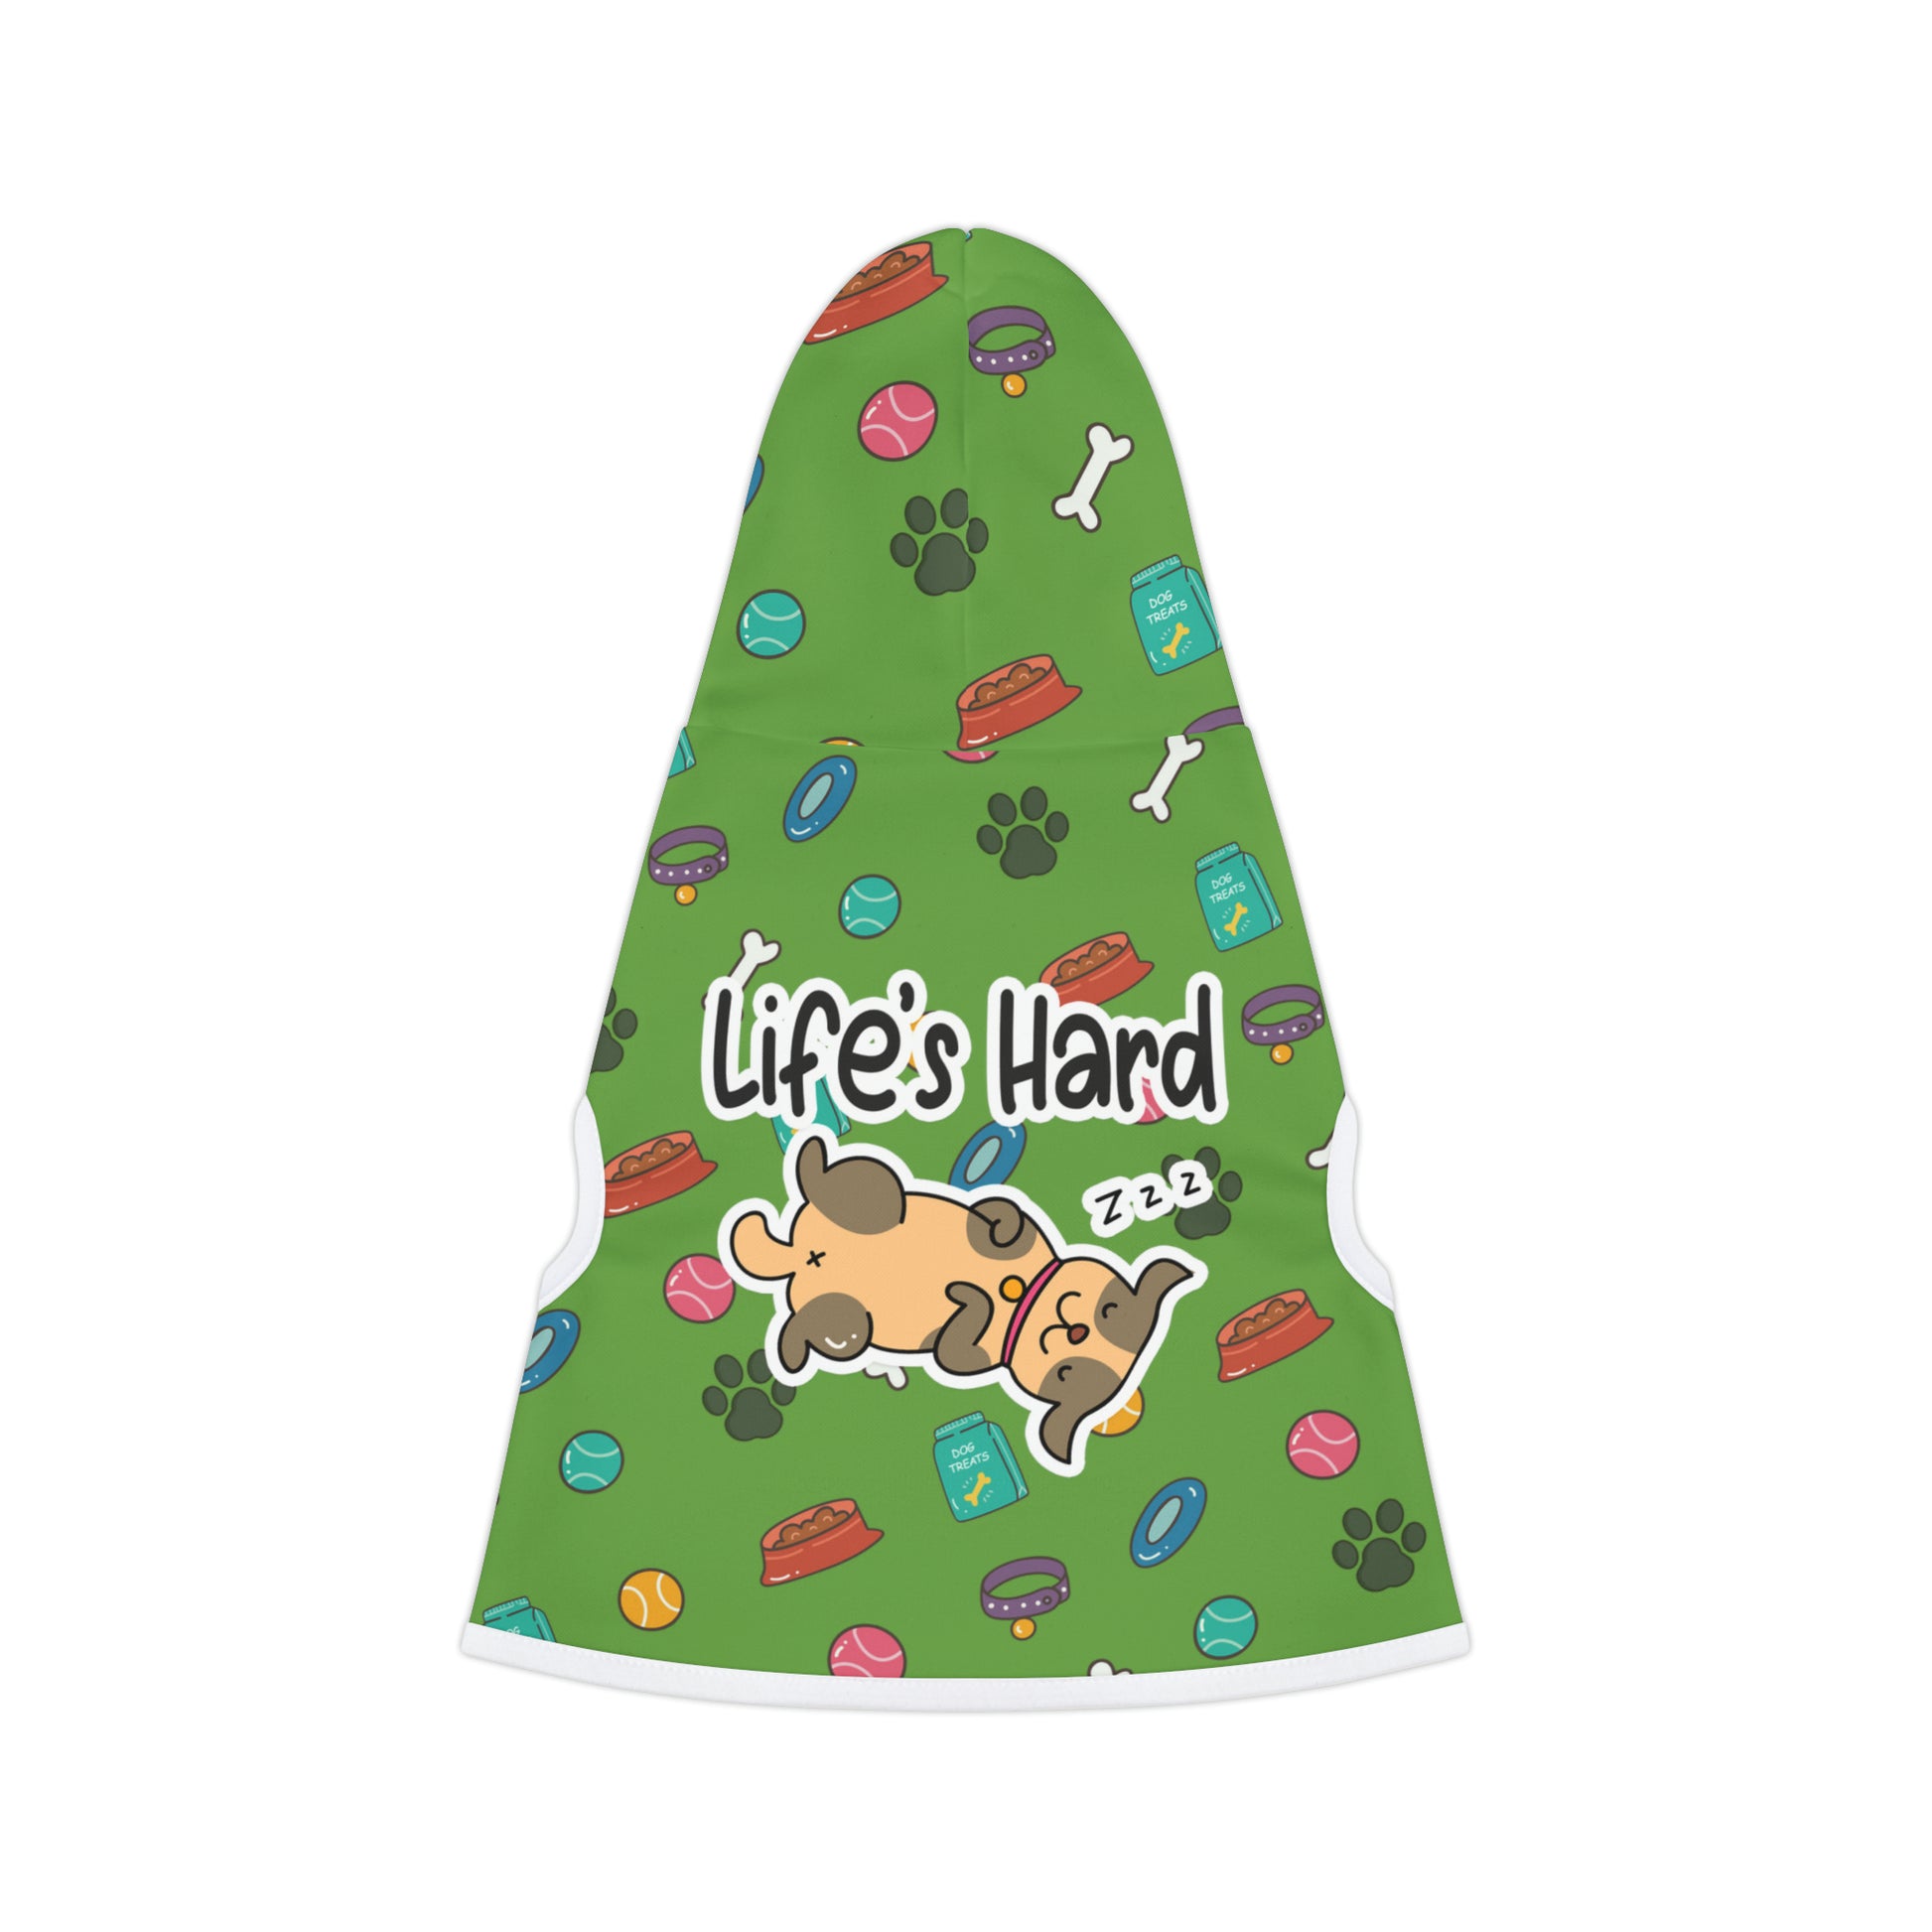 A pet hoodie with a beautiful pattern design featuring all things dog love. A smiling dog sleeping below a message that says "Life's hard". Hoodie's Color is green